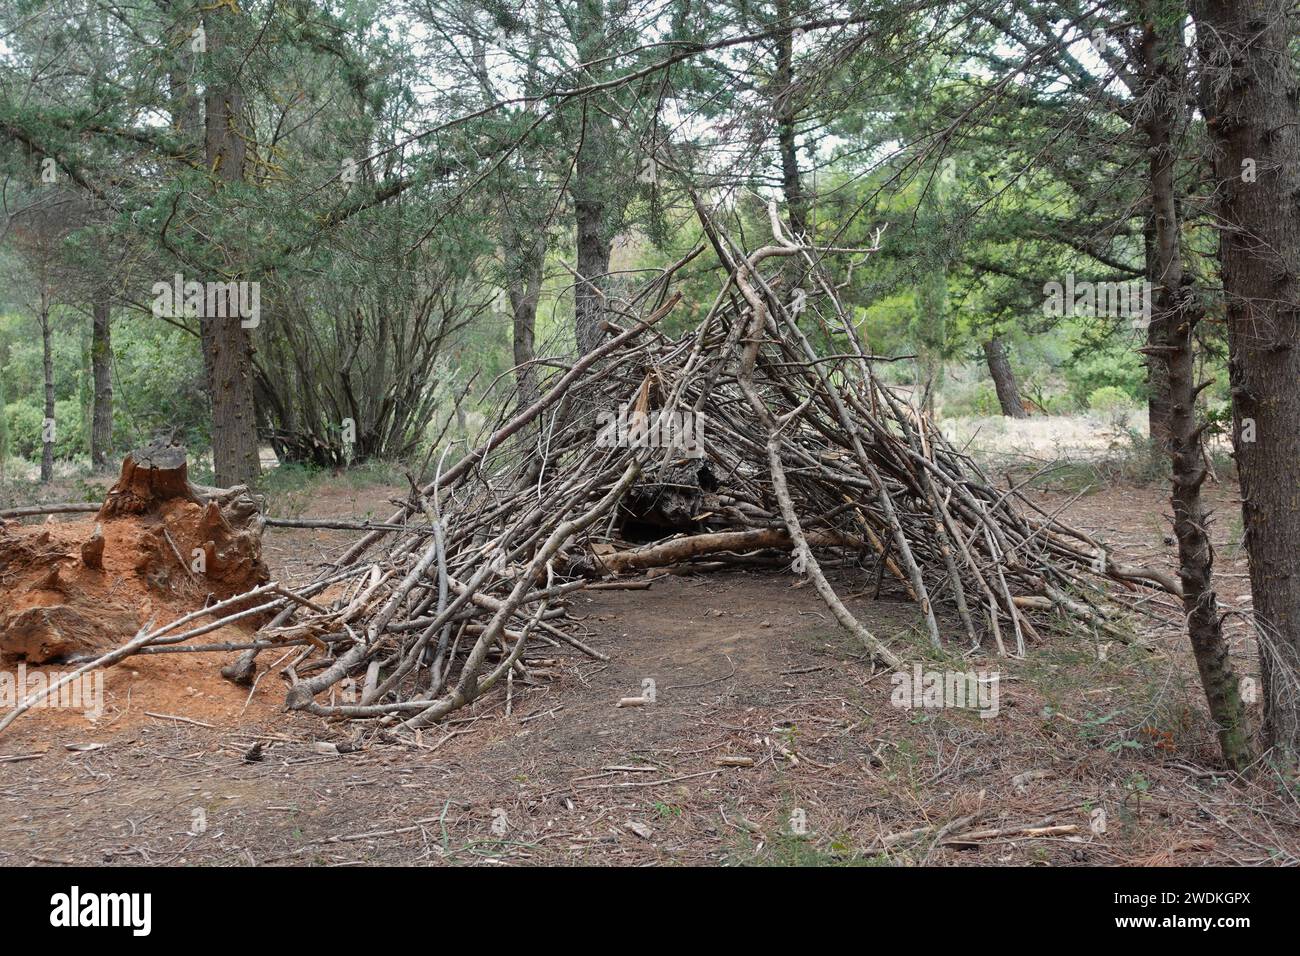 Wooden tent structure made from tree branches in the woods. Stock Photo